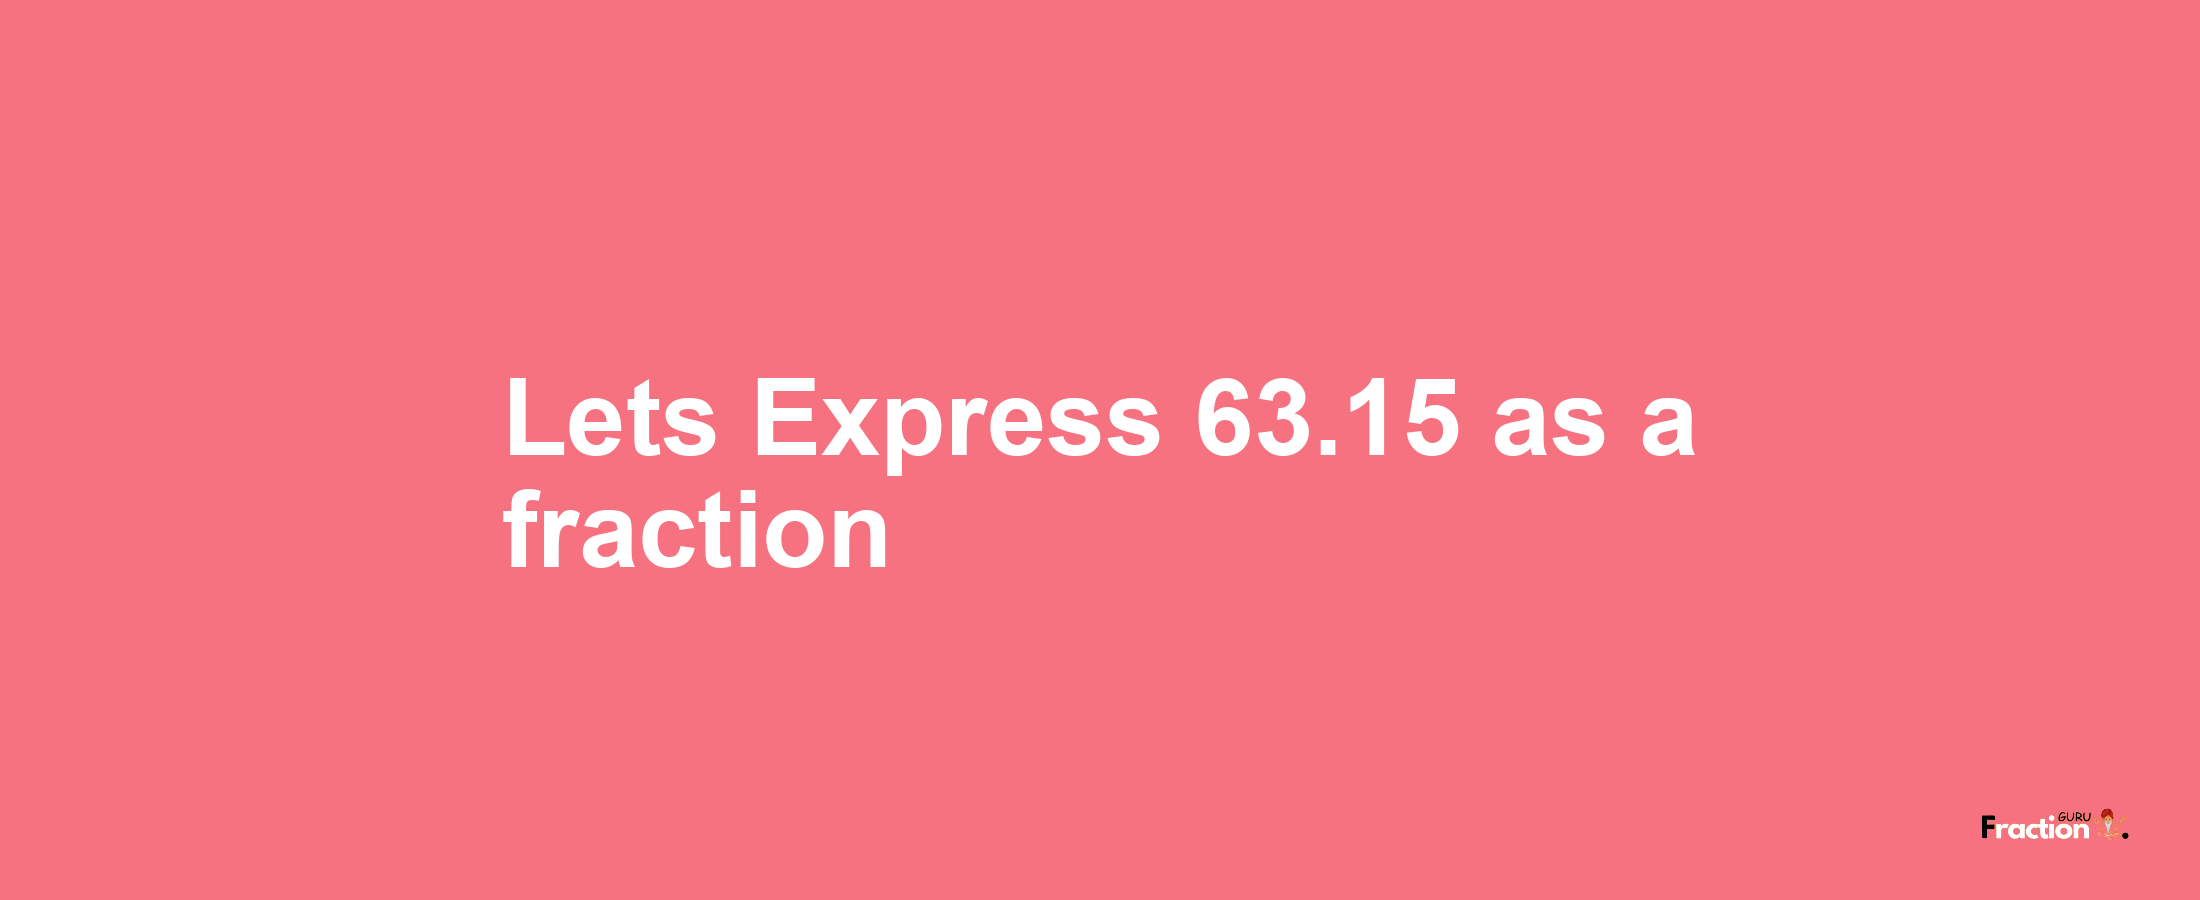 Lets Express 63.15 as afraction